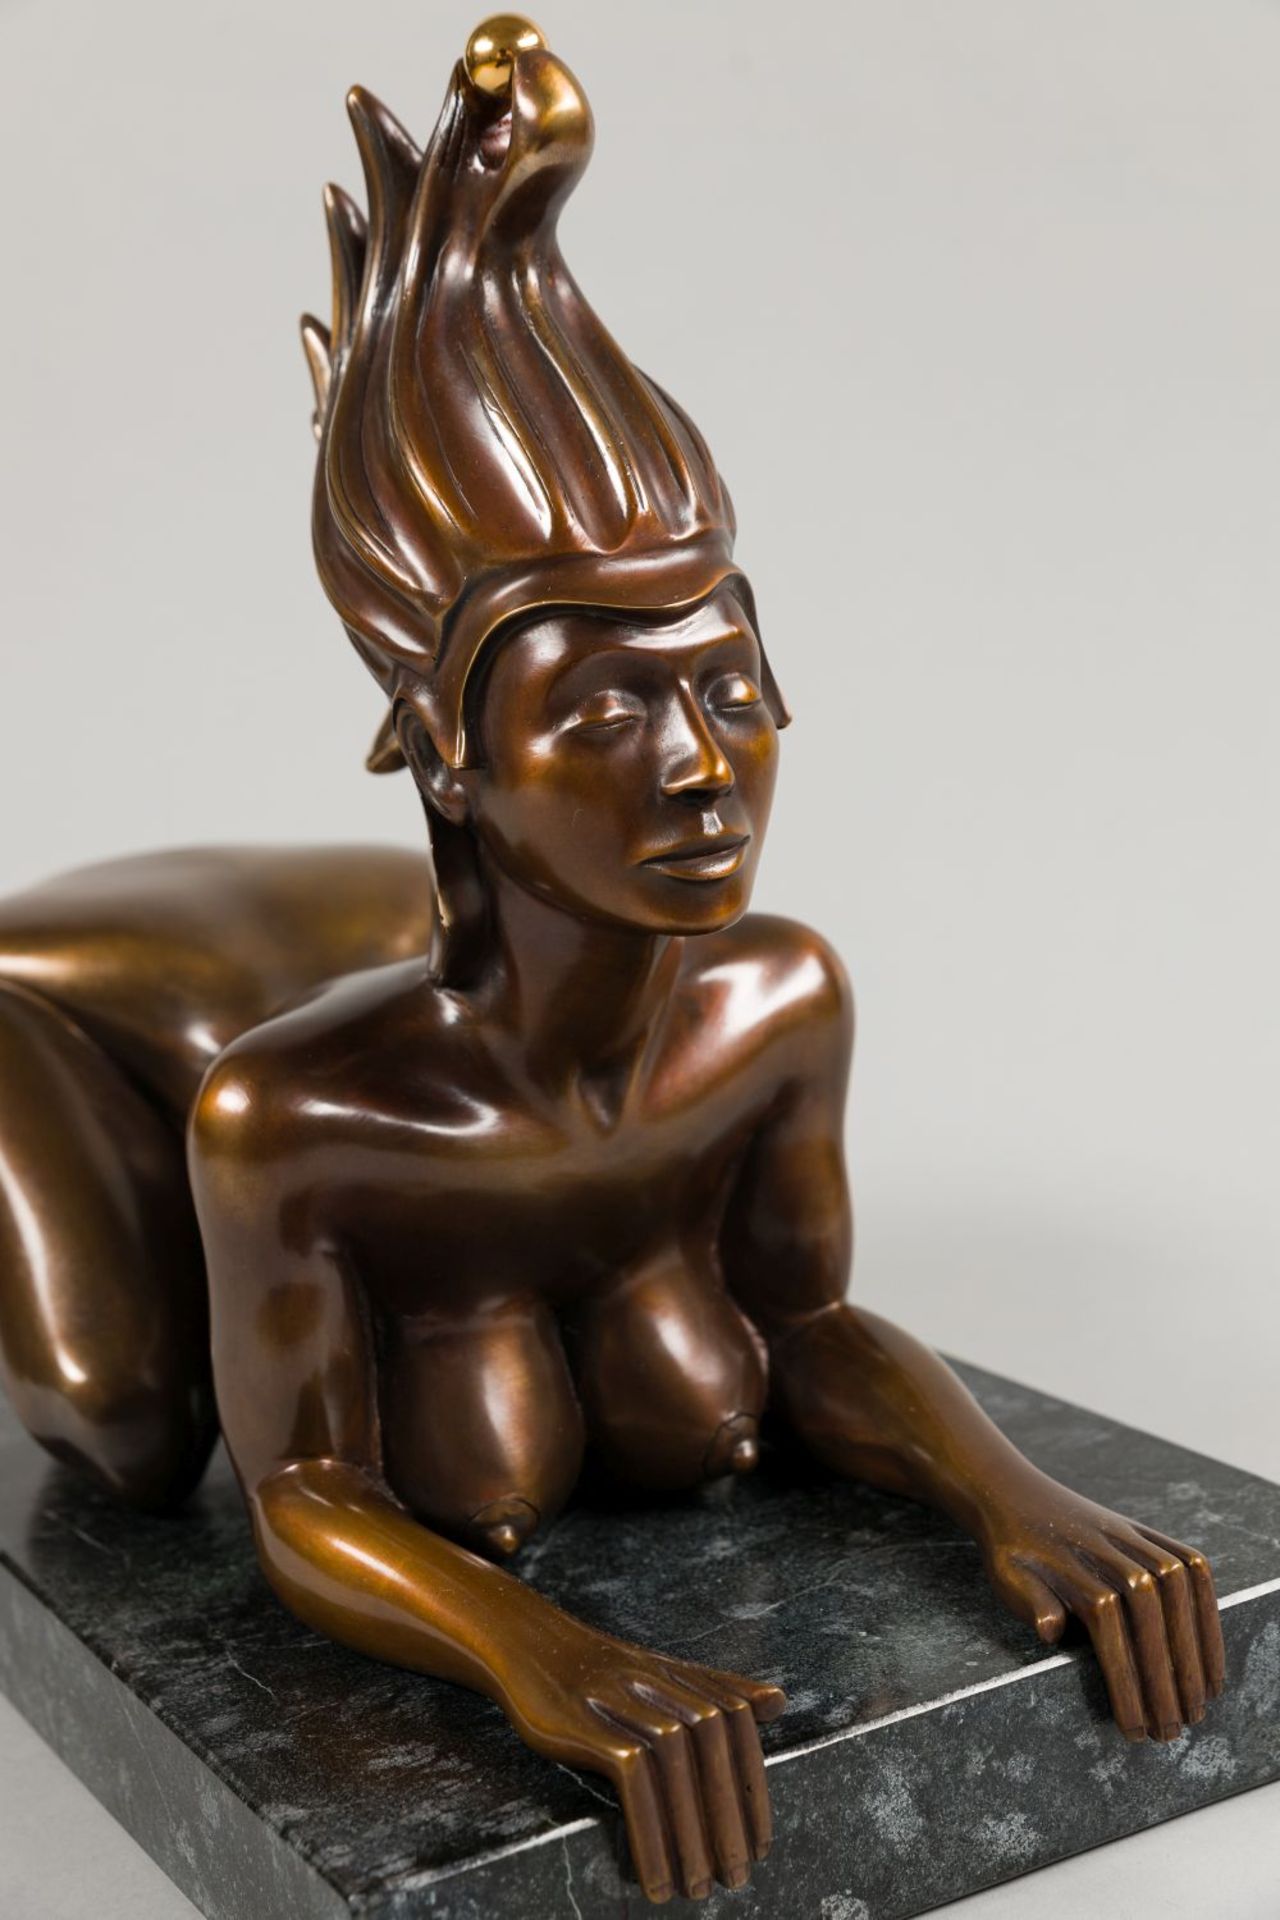 Viennese Sphinx Bronze on granite-pedestal Signed and numbered: 32/500 12,6 x 7,9 in - Image 4 of 11